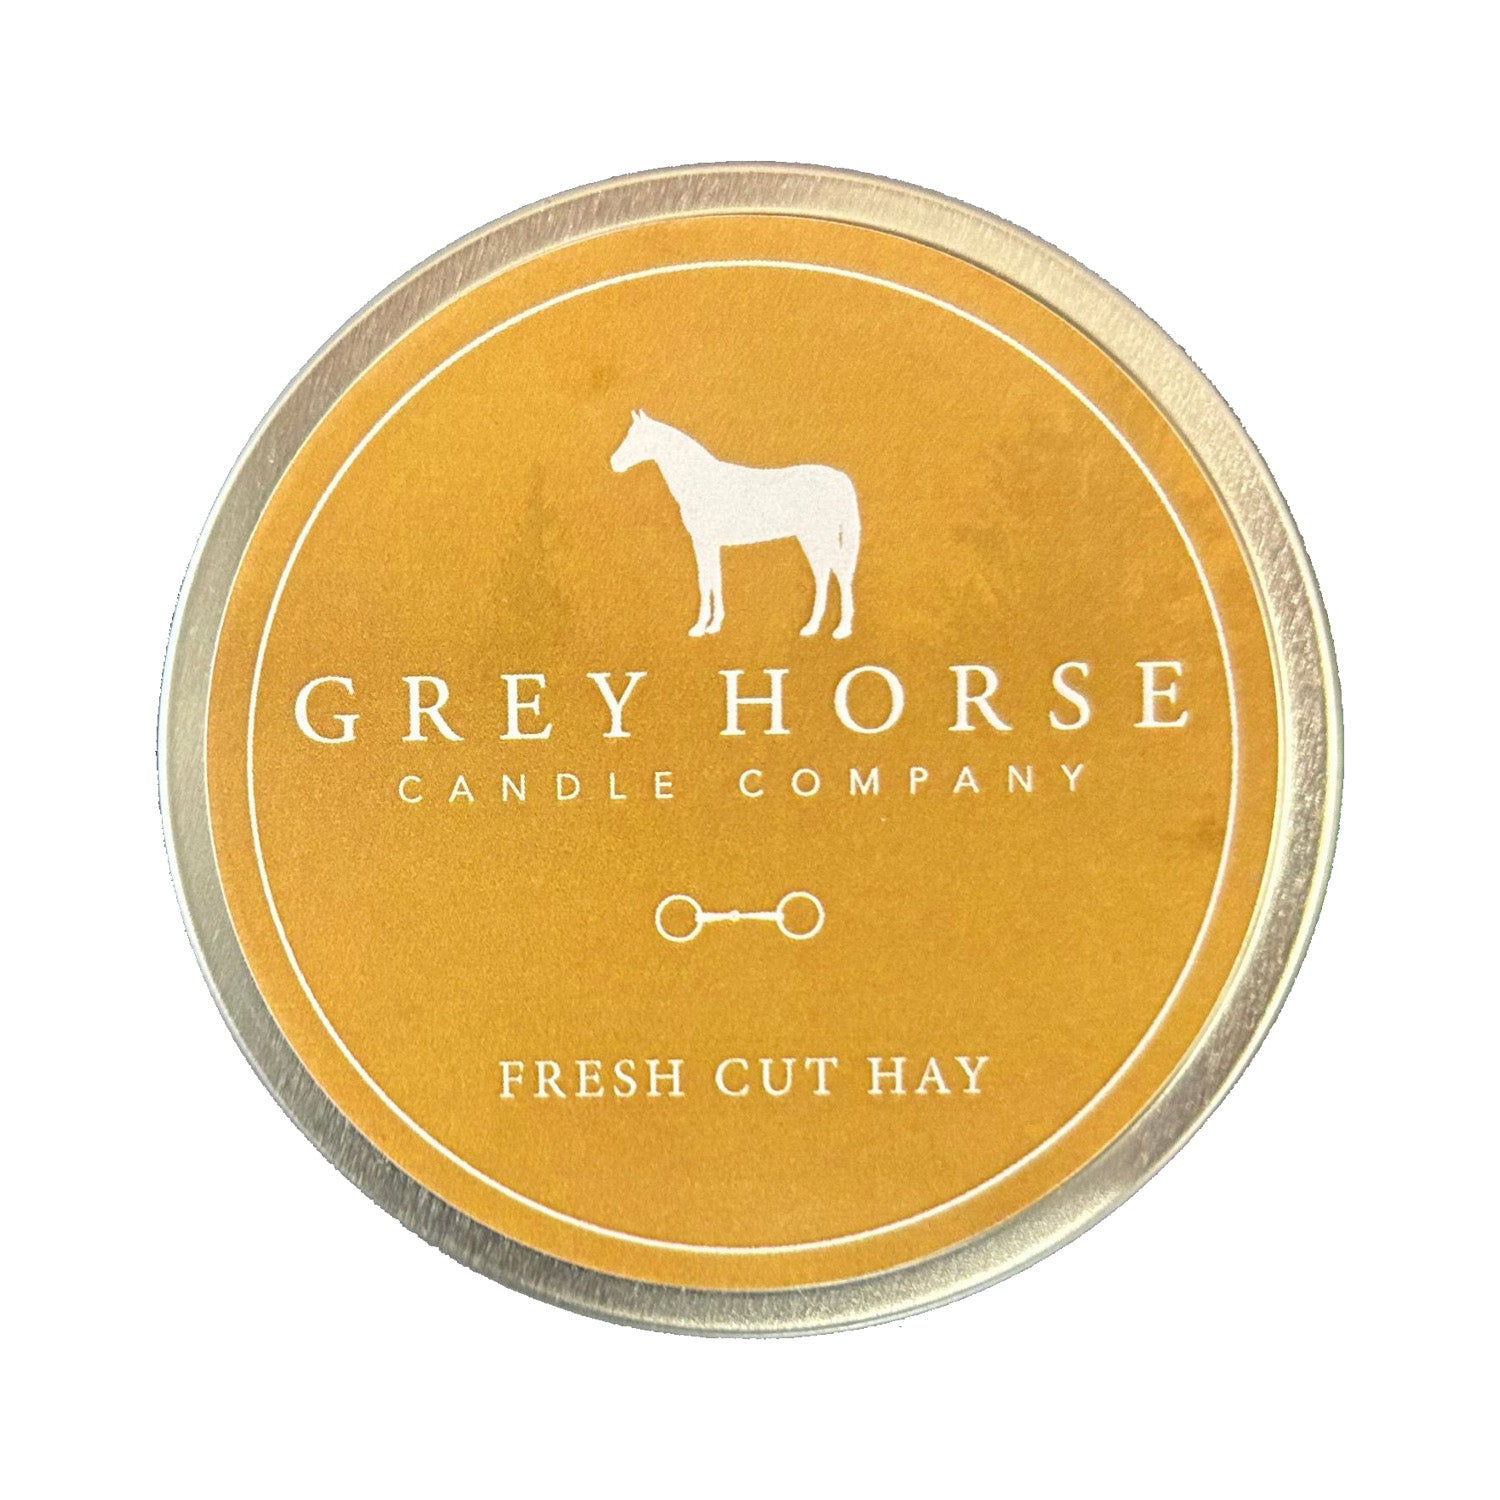 Grey Horse Soy Candle Tins